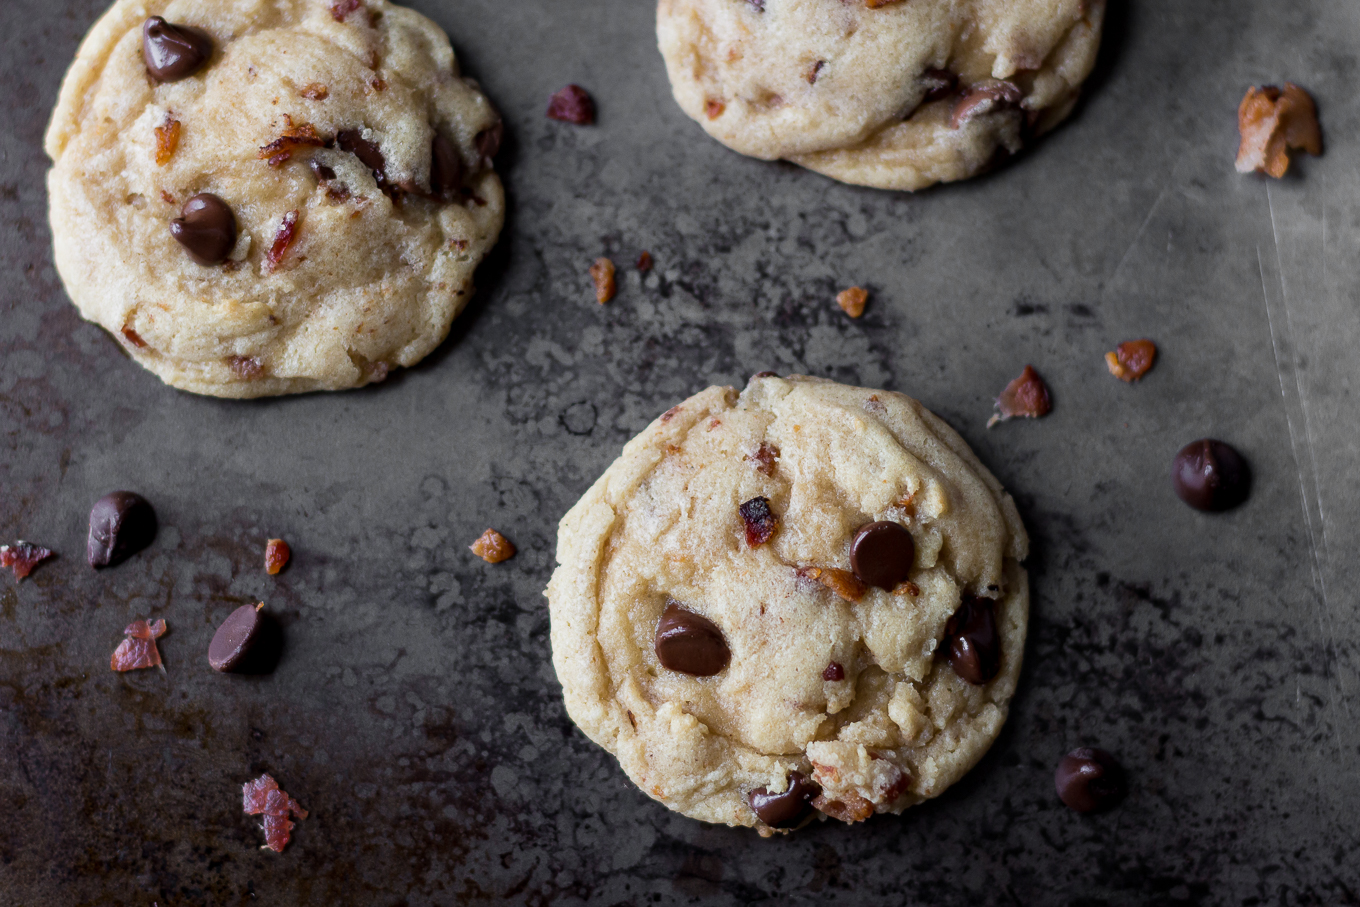 Bacon Chocolate Chip Cookies | The Kentucky Gent